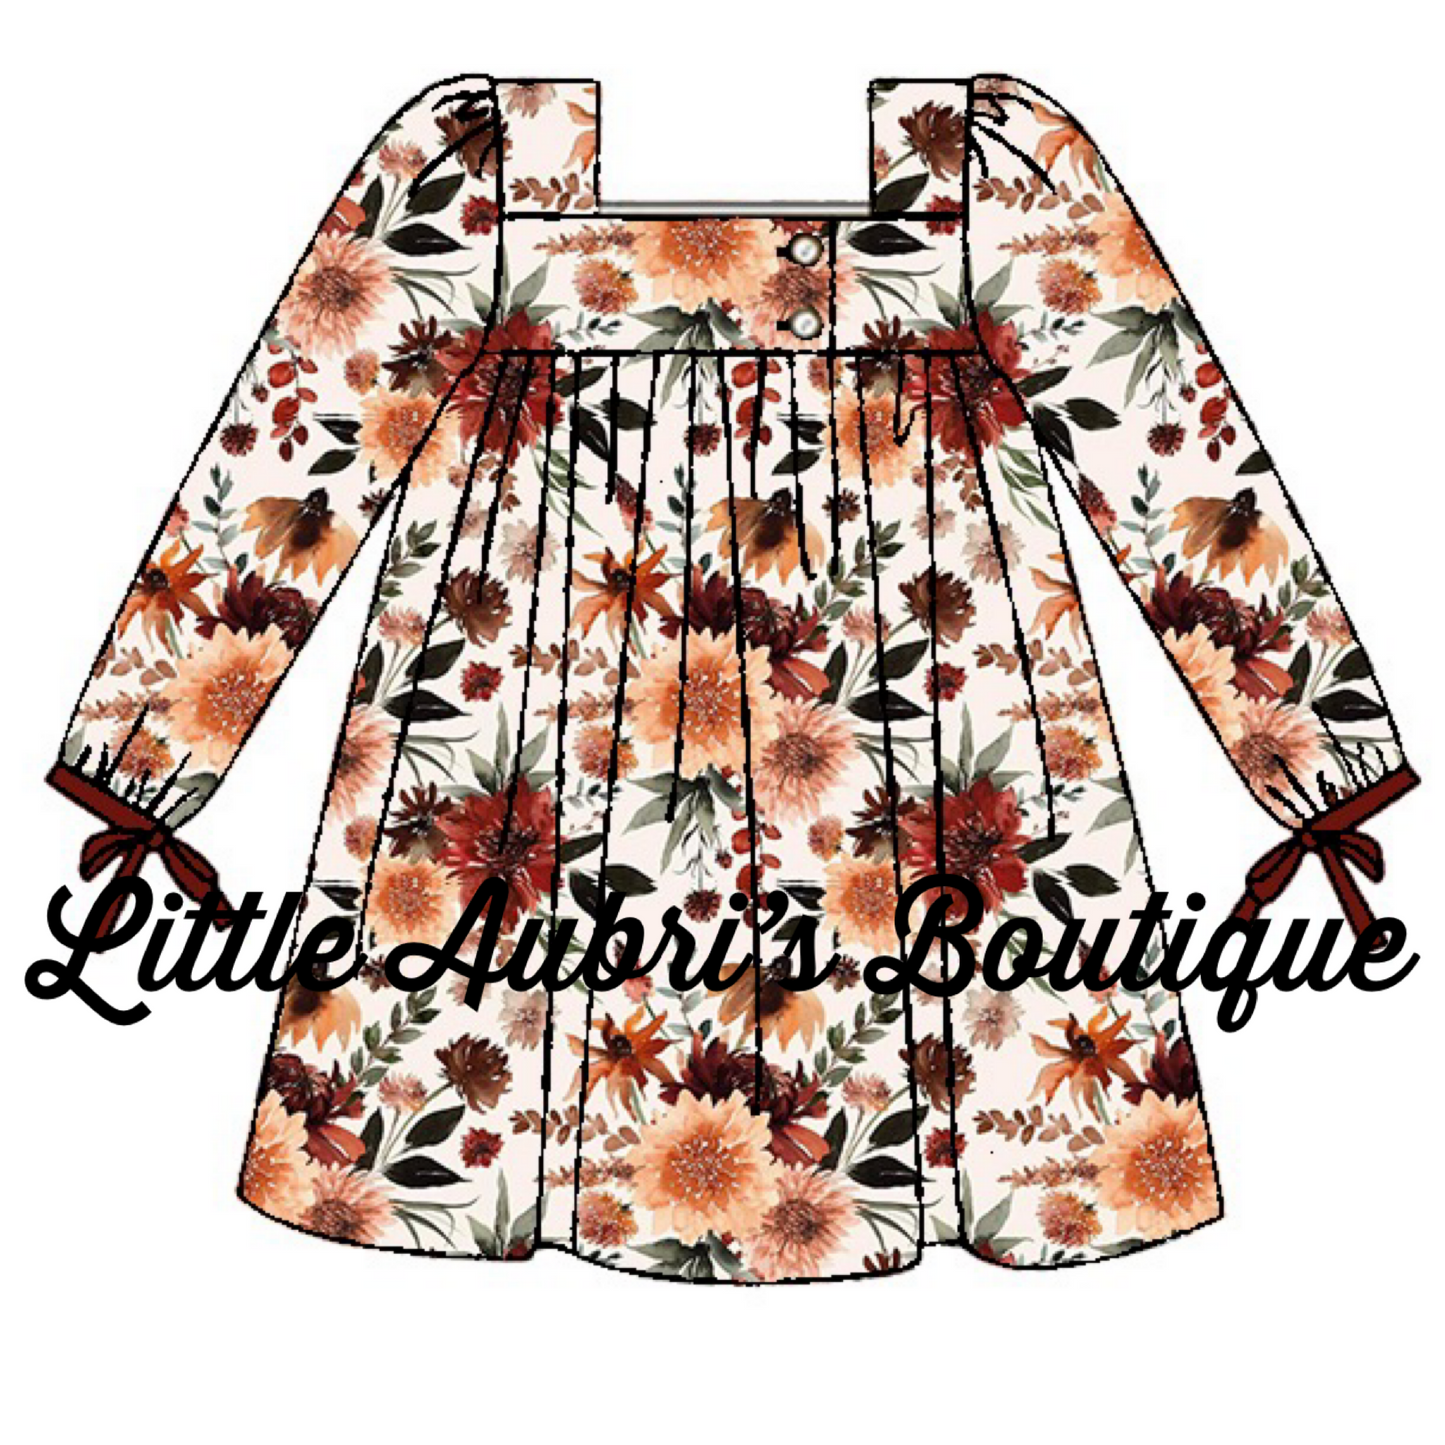 PREORDER Adult Autumn Floral Baby Doll Style Dress CLOSES 8/18